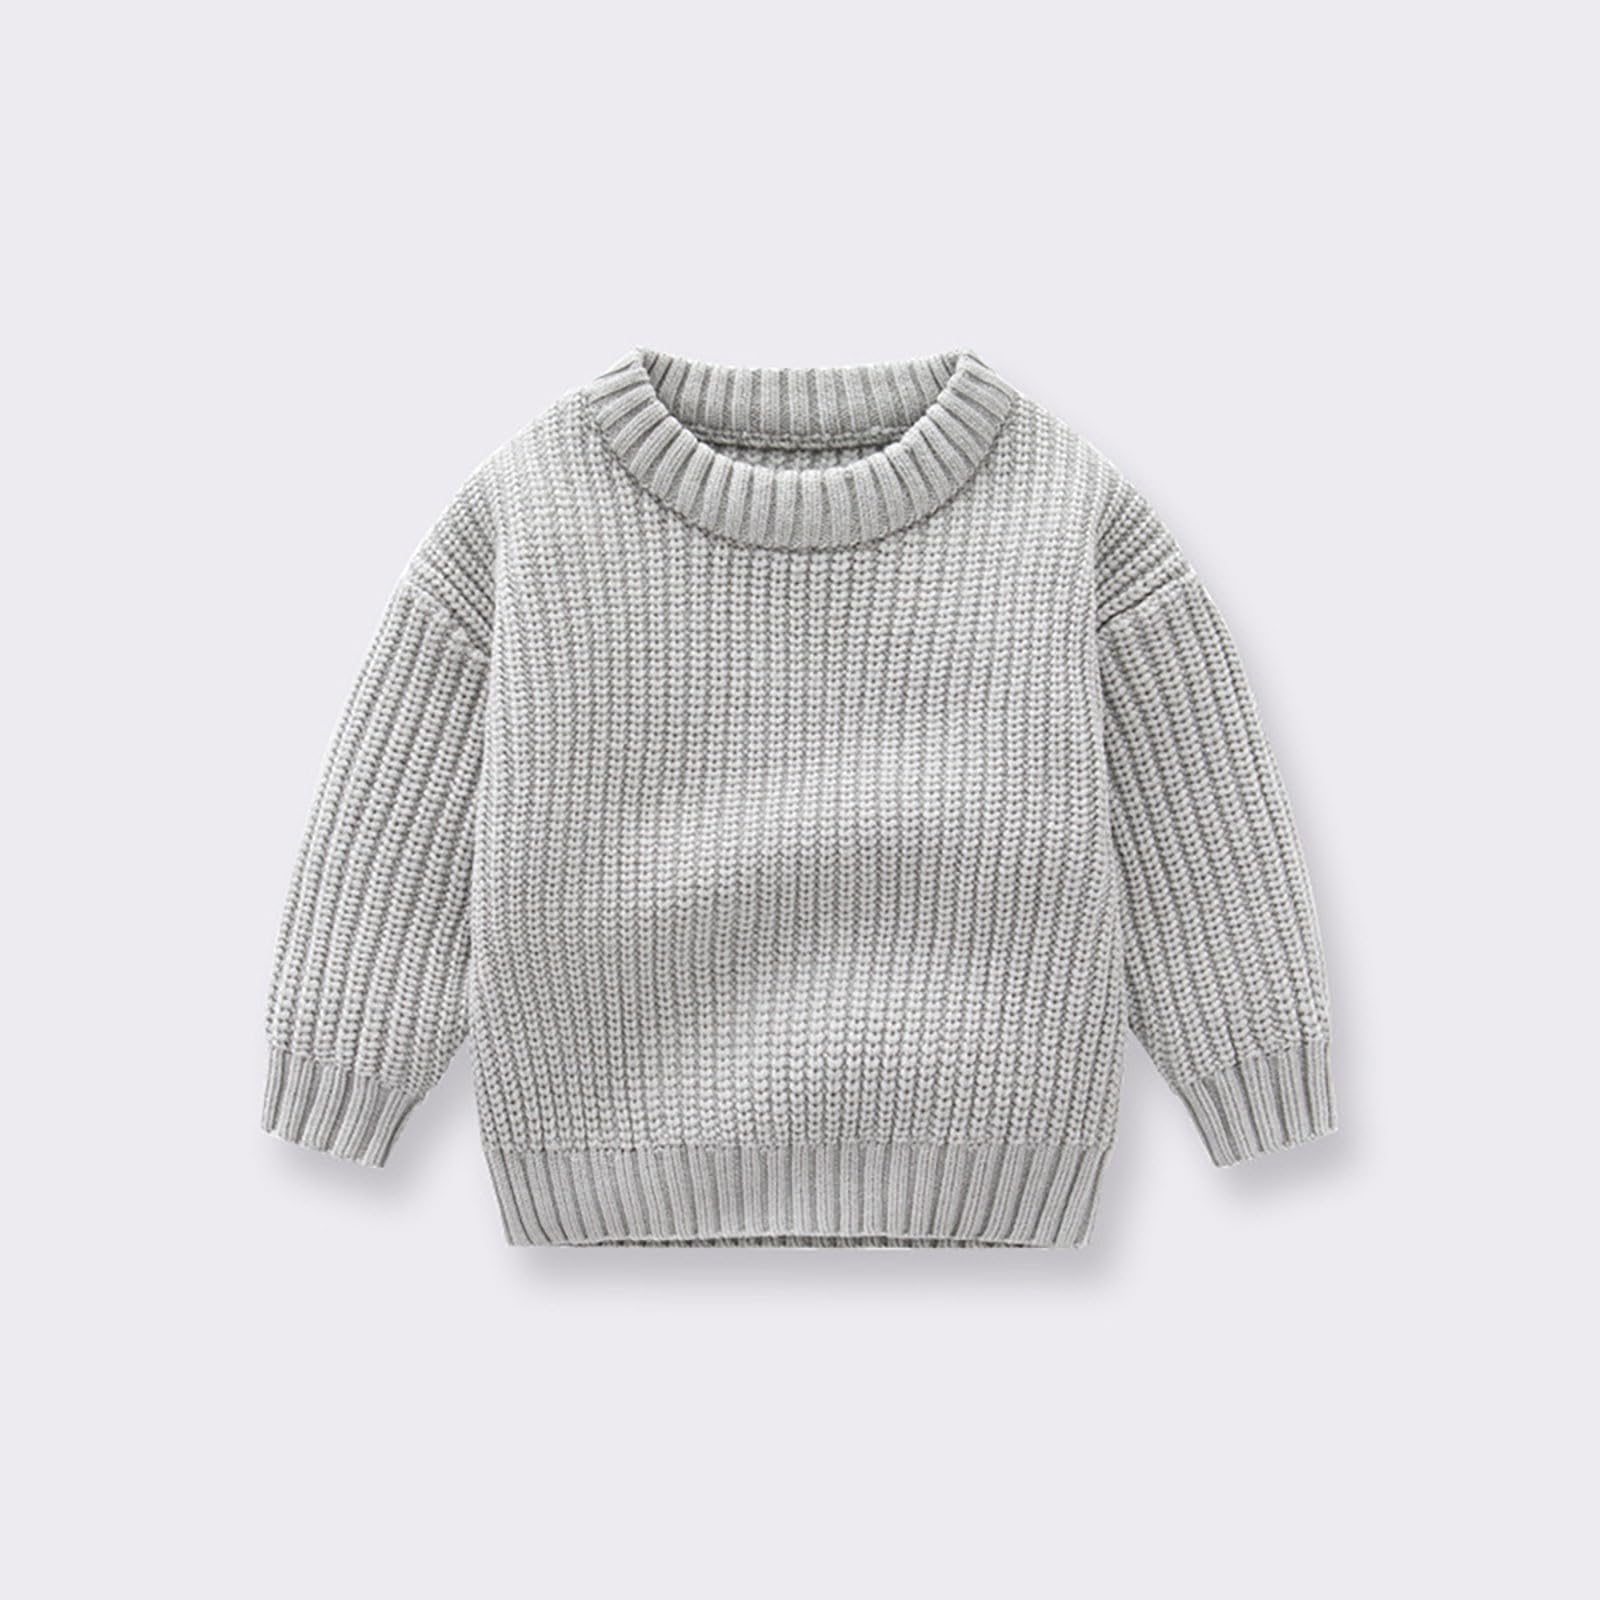 Airplane Shirt for Boys Neck Solid Knit Sweater Winter Clothes For Girls And Boys Baby Tops Clothes Tan Sweater Vest Baby Boy